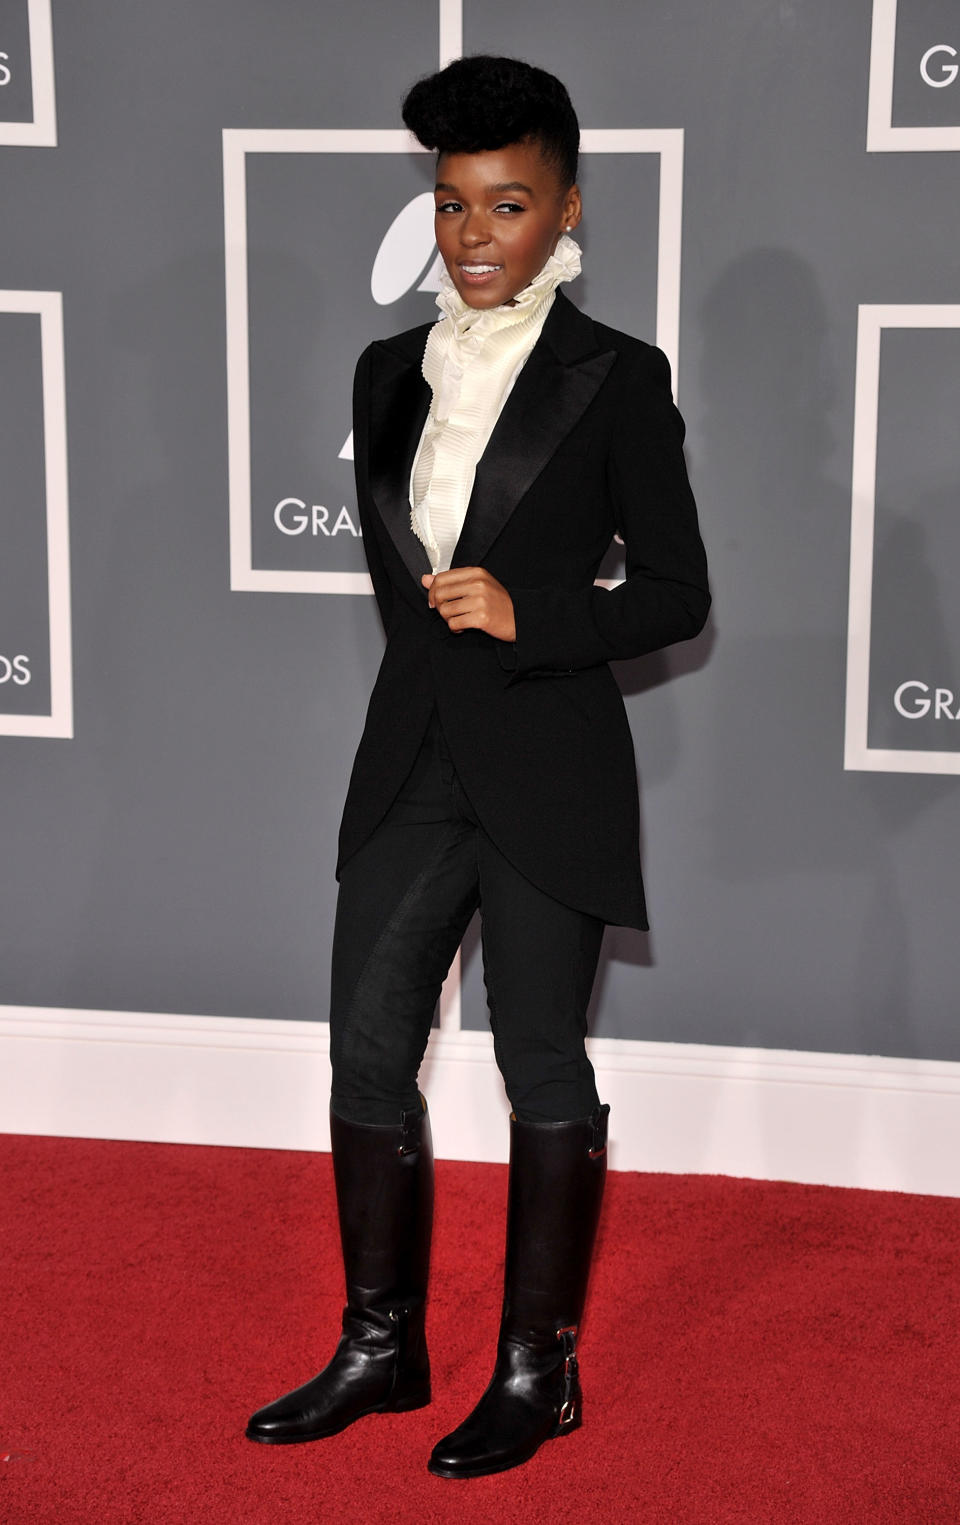 Janelle Monae, first Grammys 2009, red carpet, then and now, black and white style, equestrian fashion 